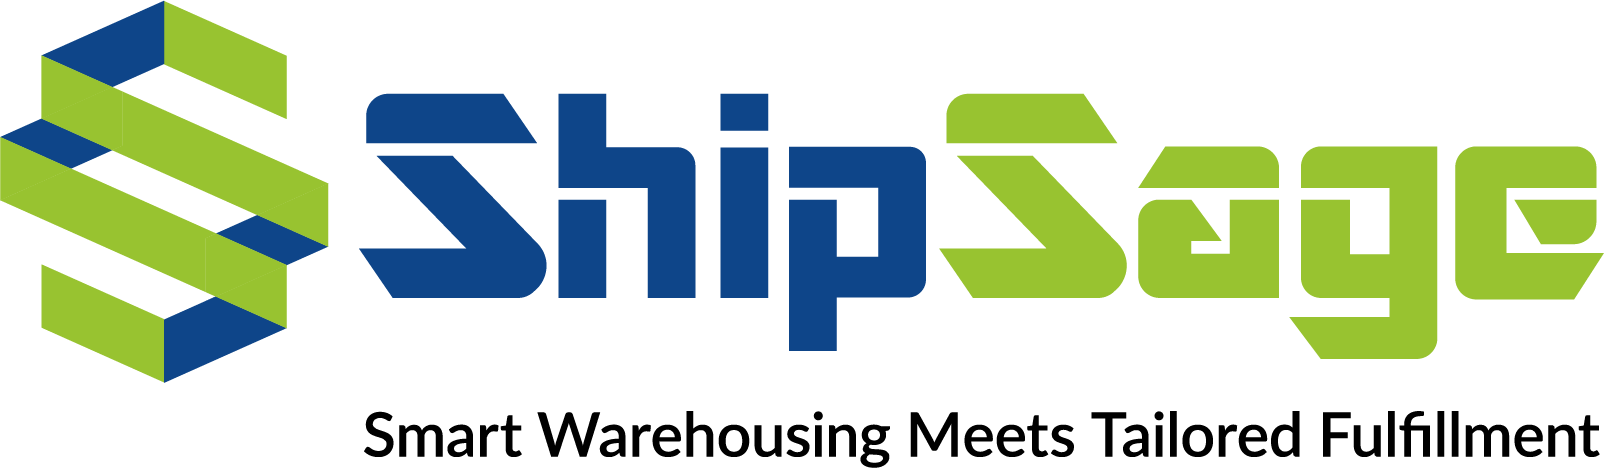 Partner with ShipSage - Walmart.com solution provider page